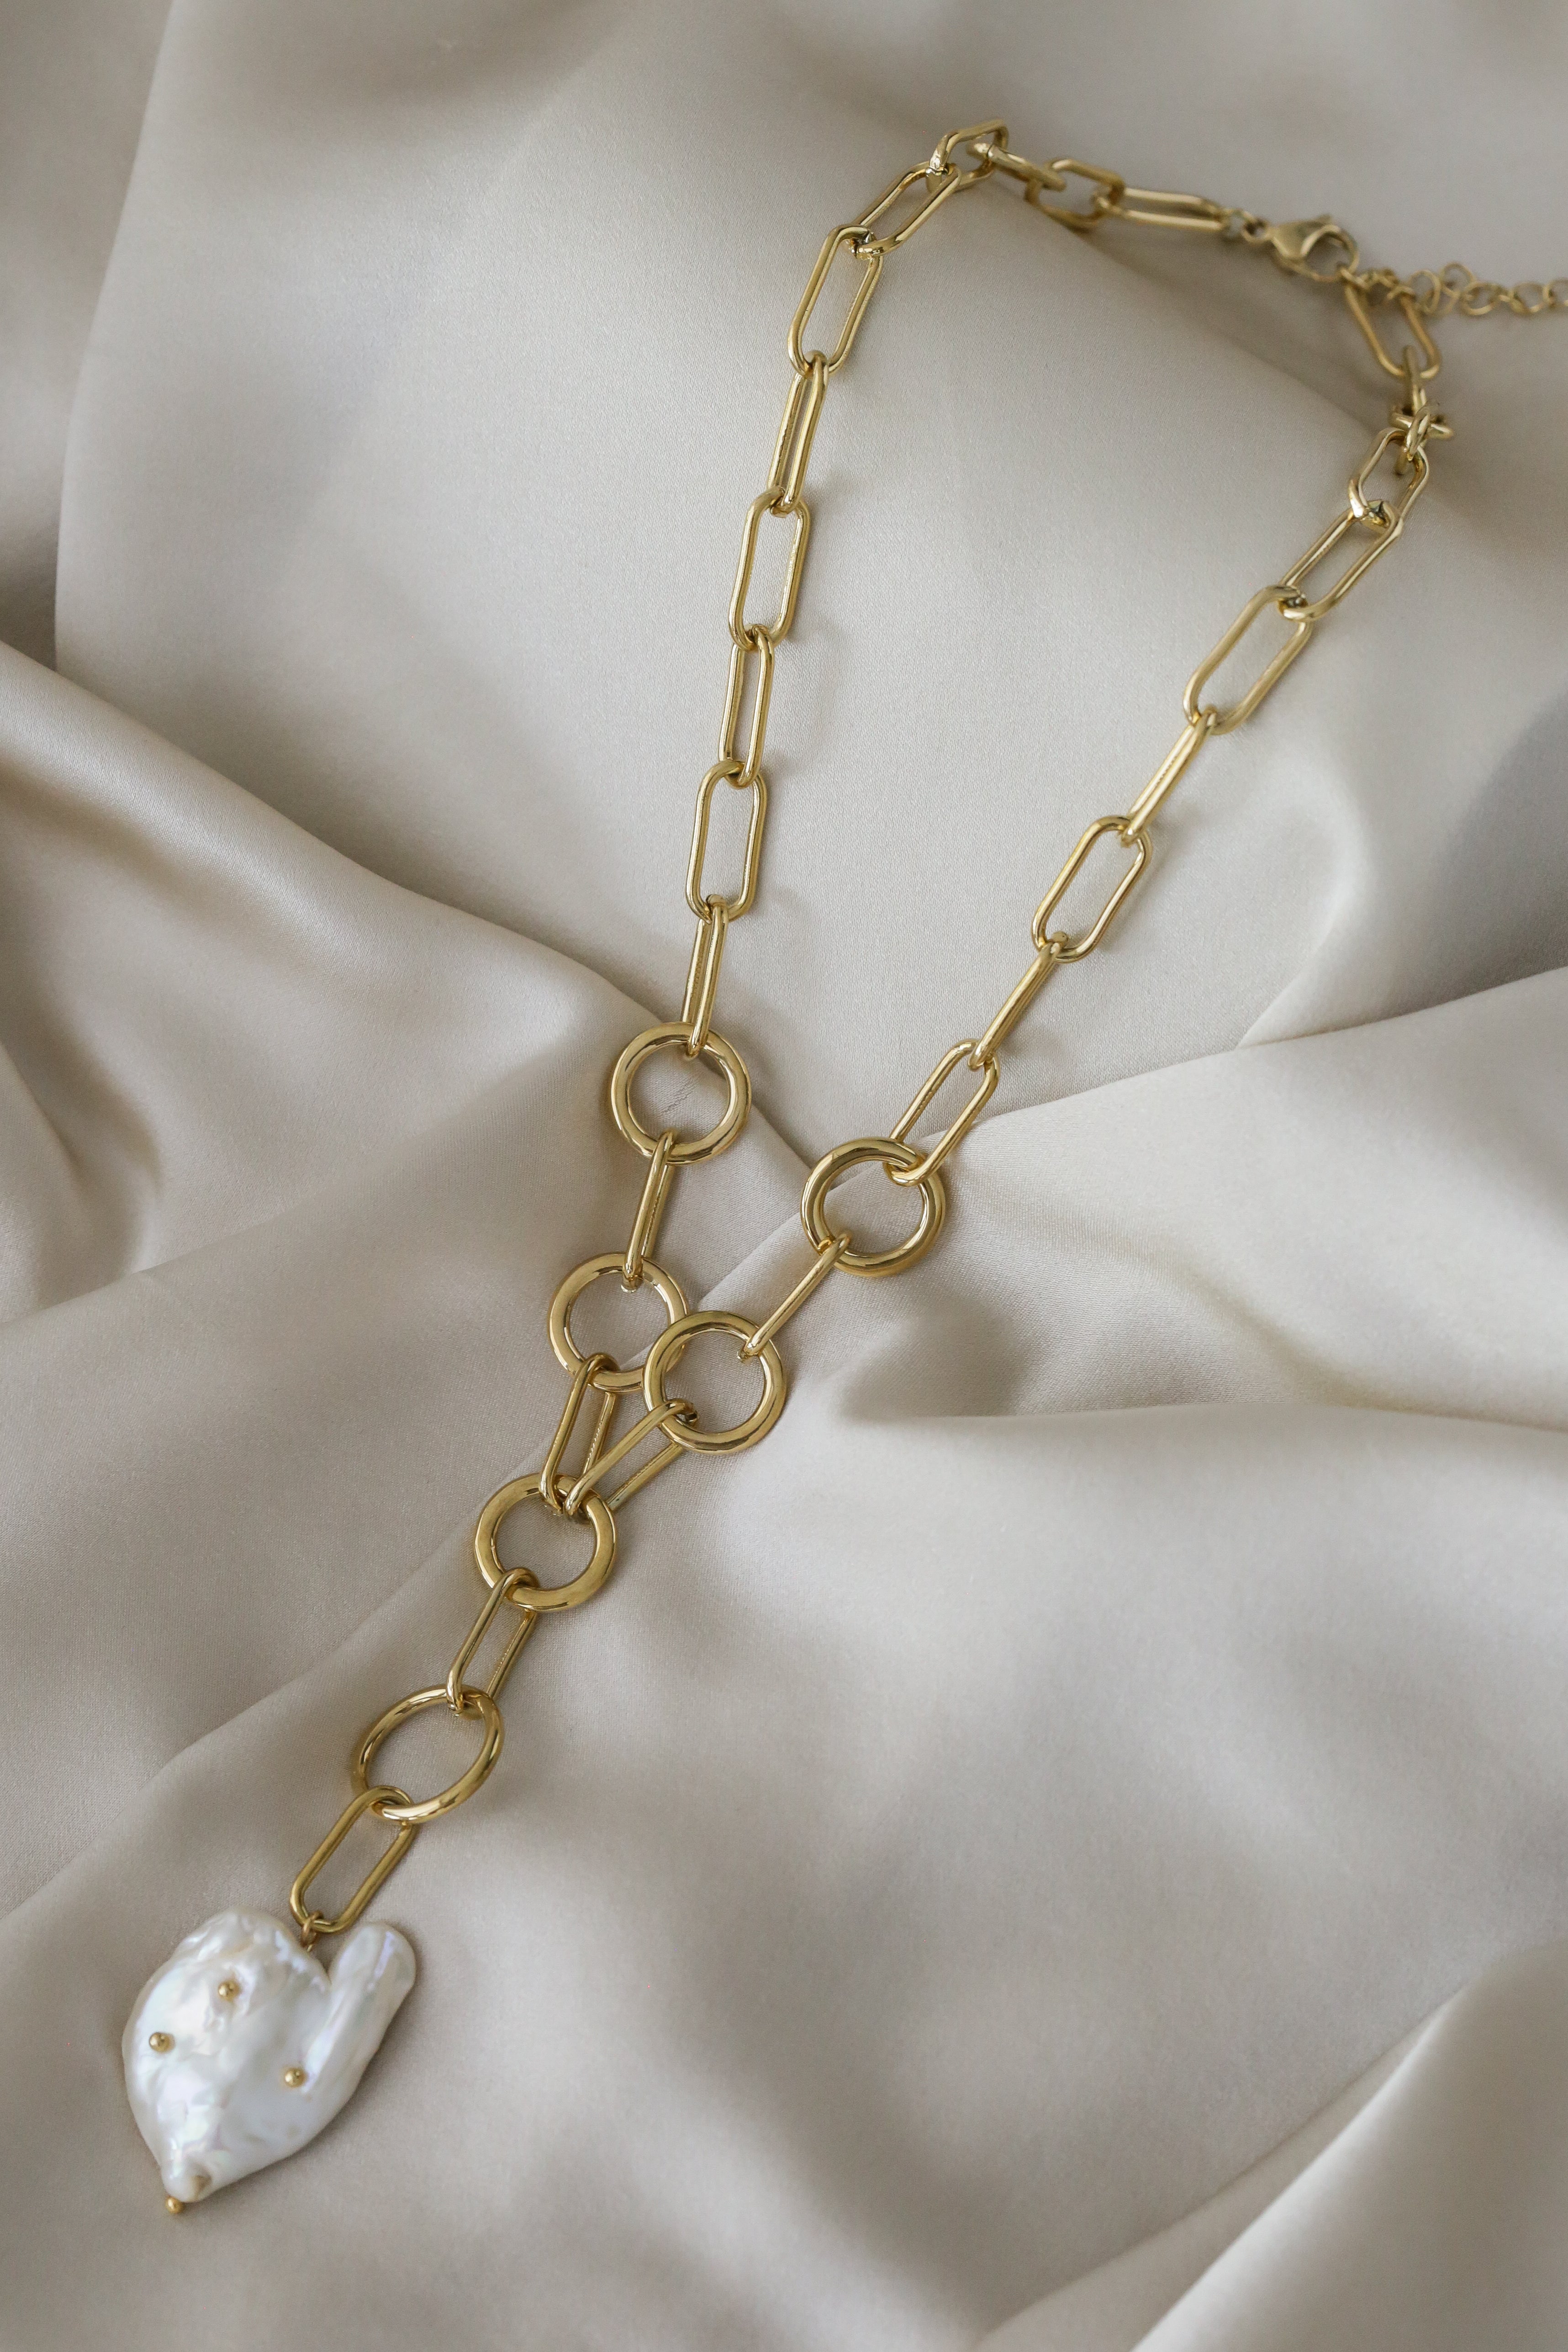 Xaria Necklace - Boutique Minimaliste has waterproof, durable, elegant and vintage inspired jewelry